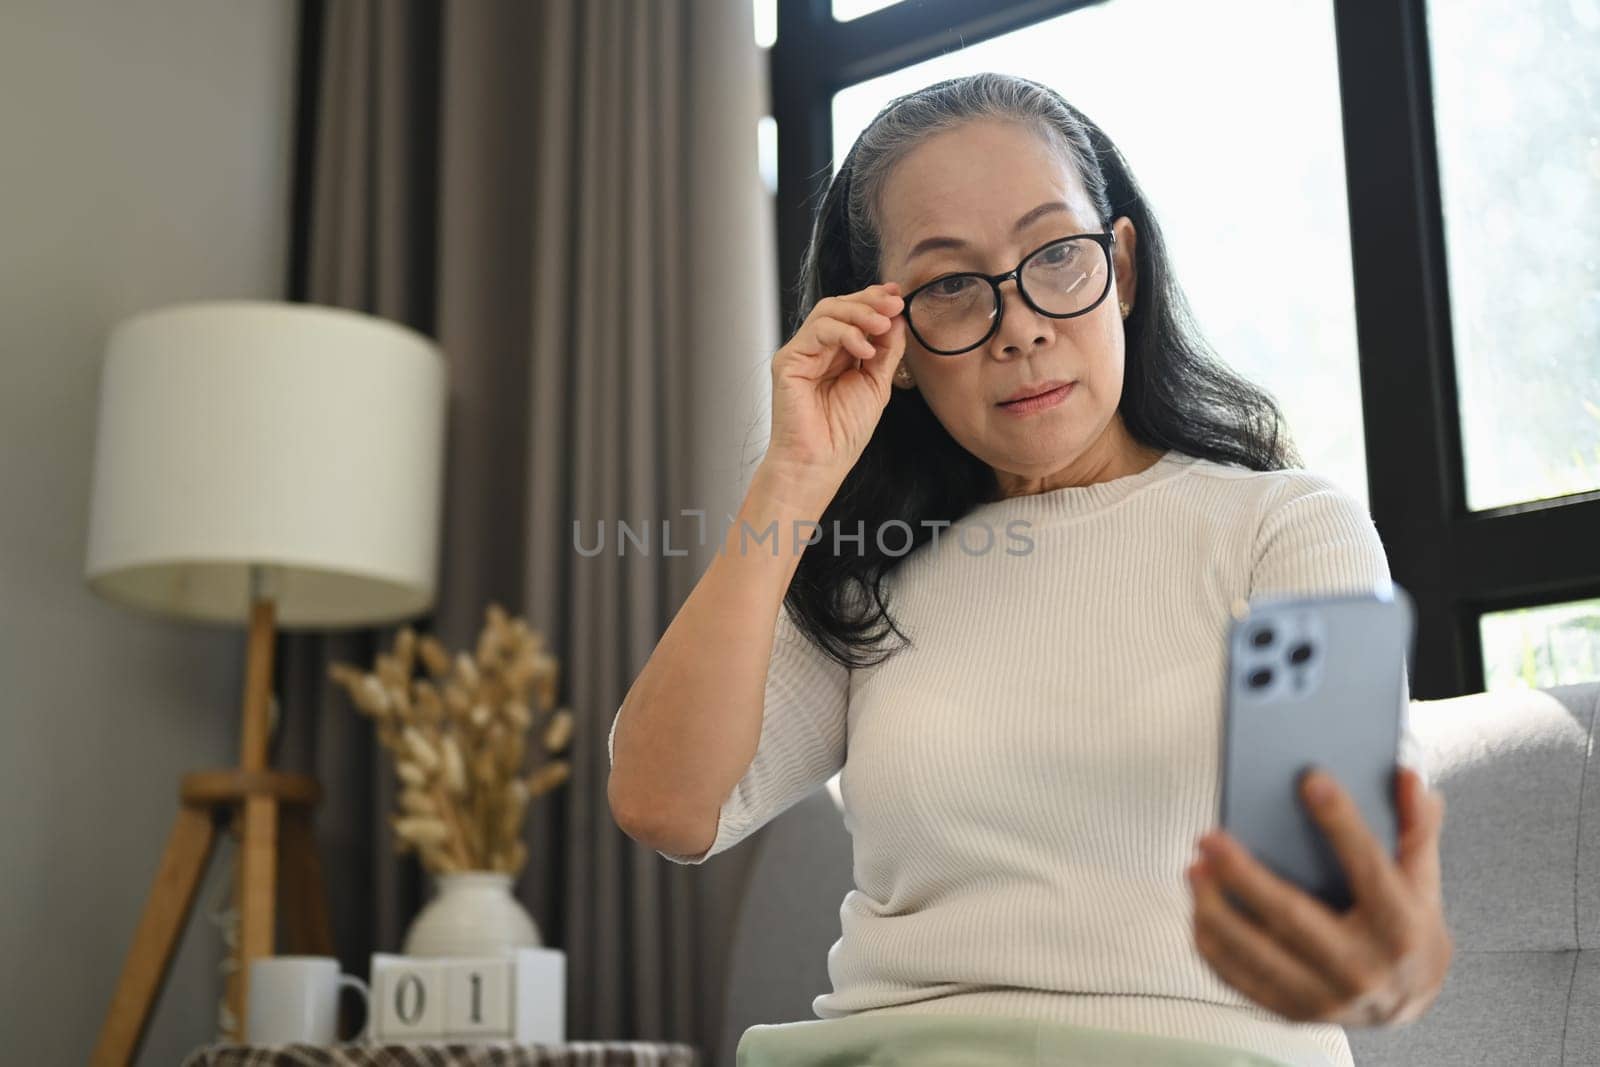 Beautiful middle age woman in glasses checking apps on mobile phone while sitting on couch.